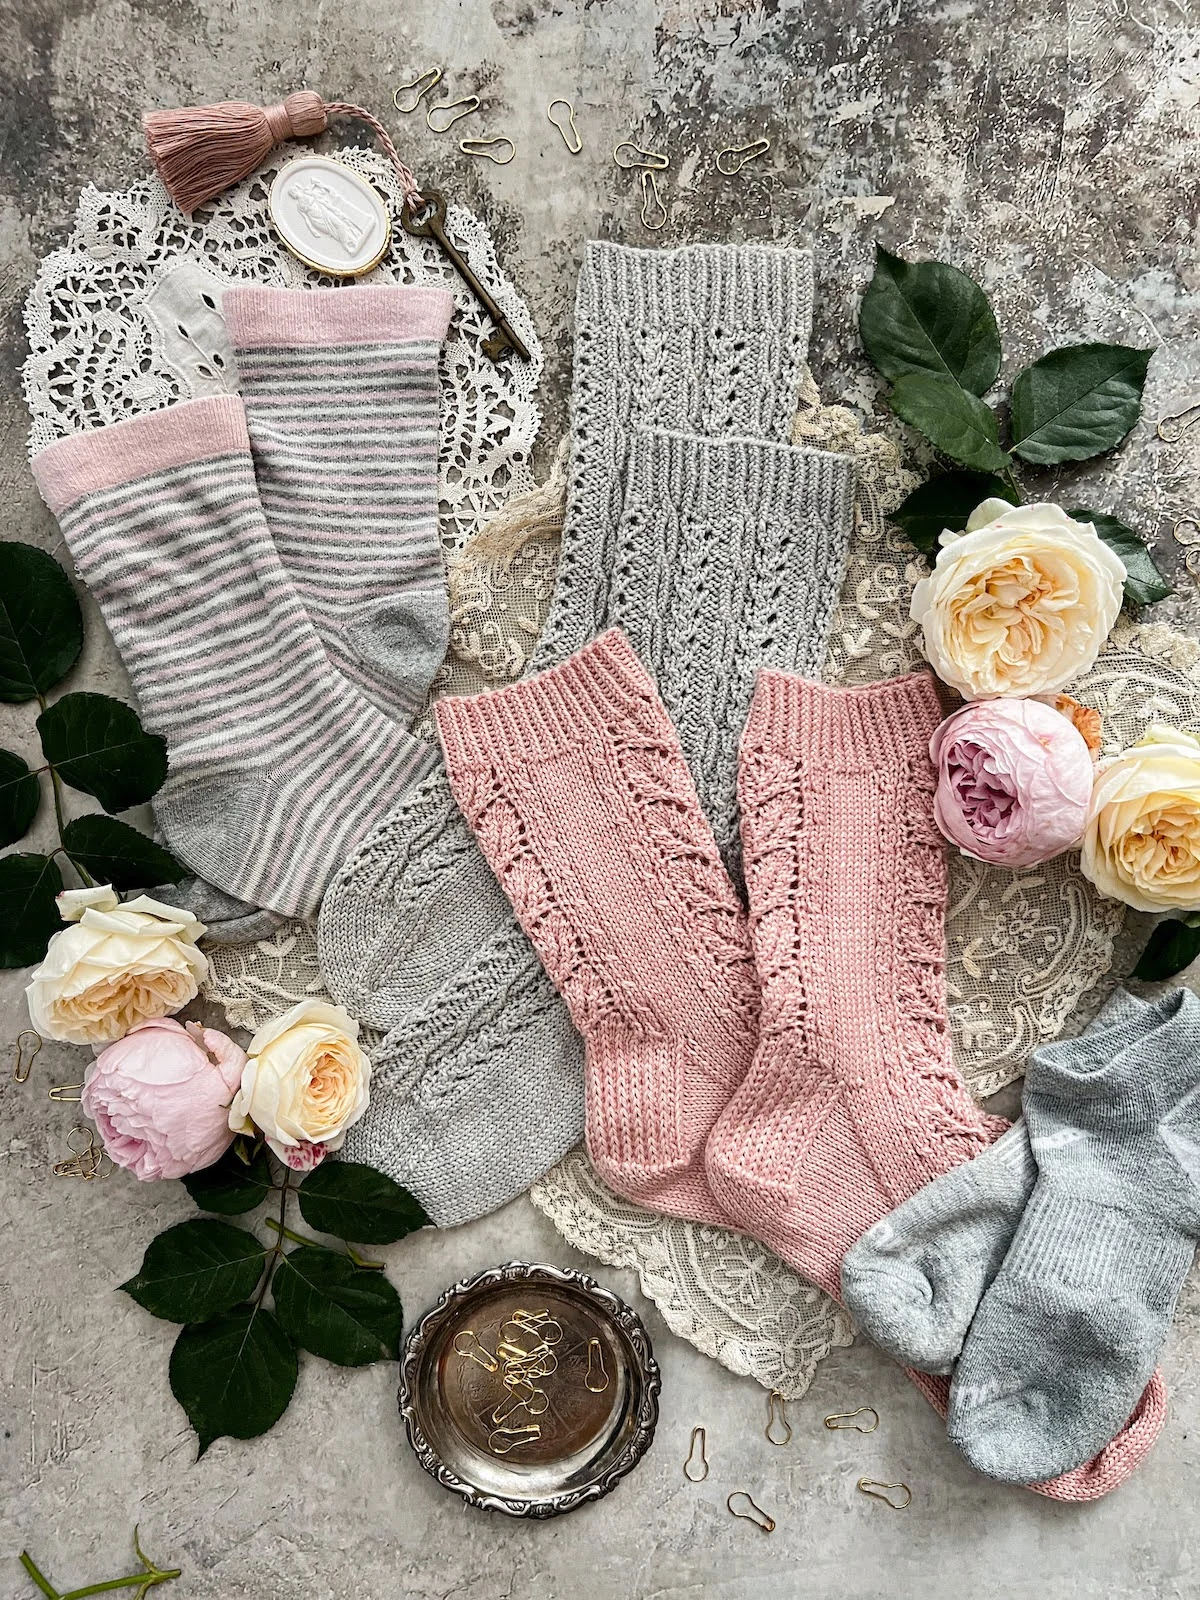 A top-down photo of two pairs of handknit socks (pink and gray) and two pairs of store-bought socks (gray athletic socks and mid-calf socks with stripes of pink, white, and gray). They're surrounded by pink and yellow roses, a plaster intaglio, a brass key with a pink tassel, and a tiny silver tray with brass bulb pins in it.